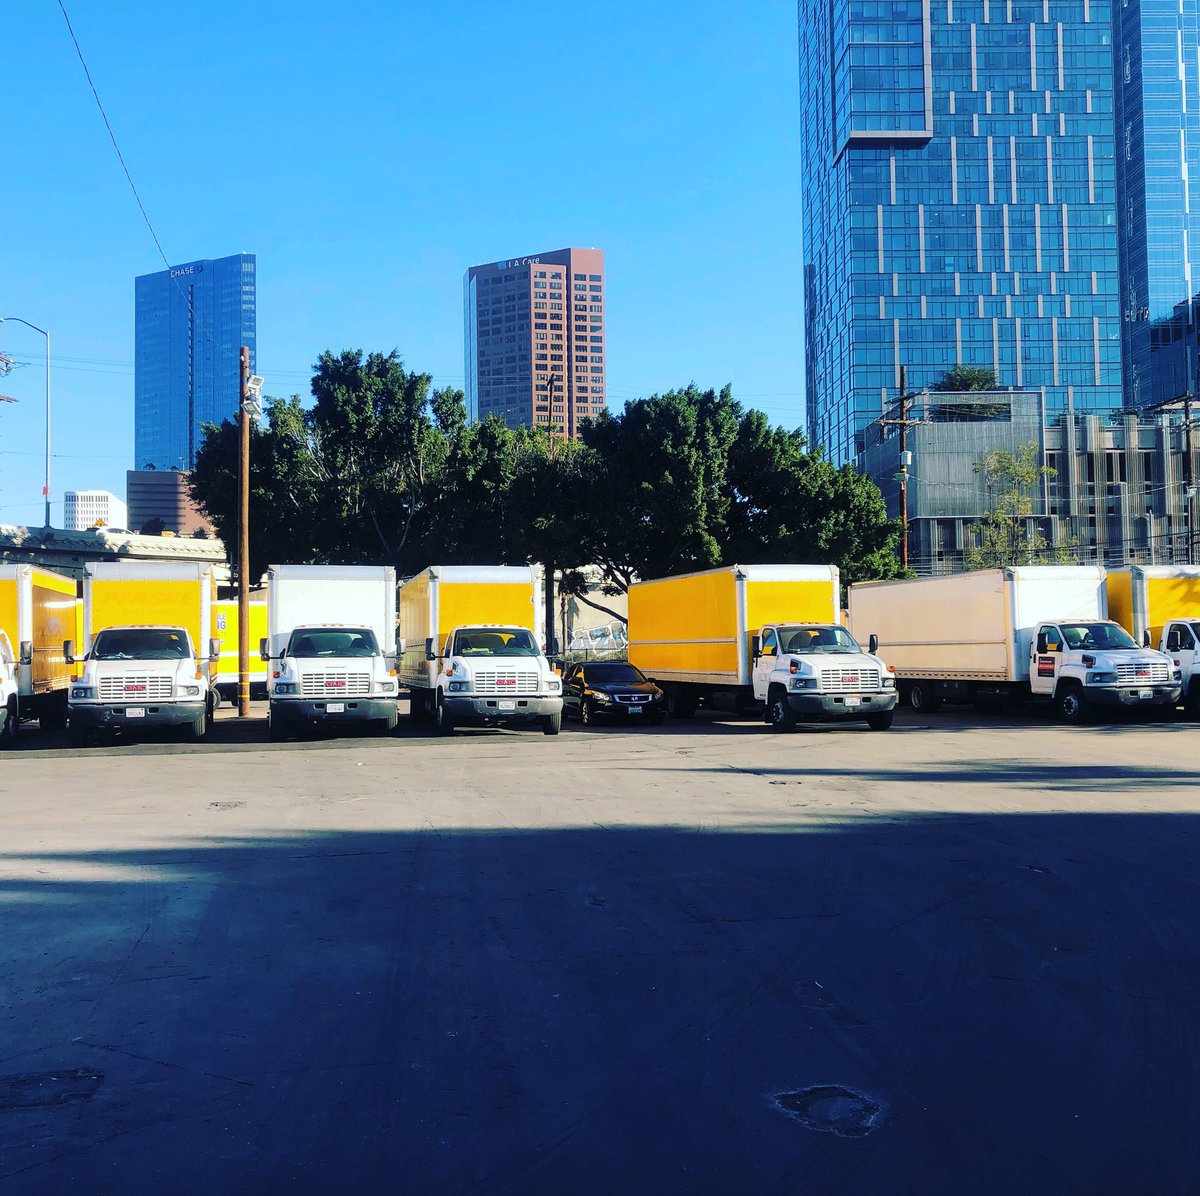 Commercial truck parking available in #DTLA . Contact us at 866-860-7011 #commercialparking #truckparking #LosAngeles #downtown